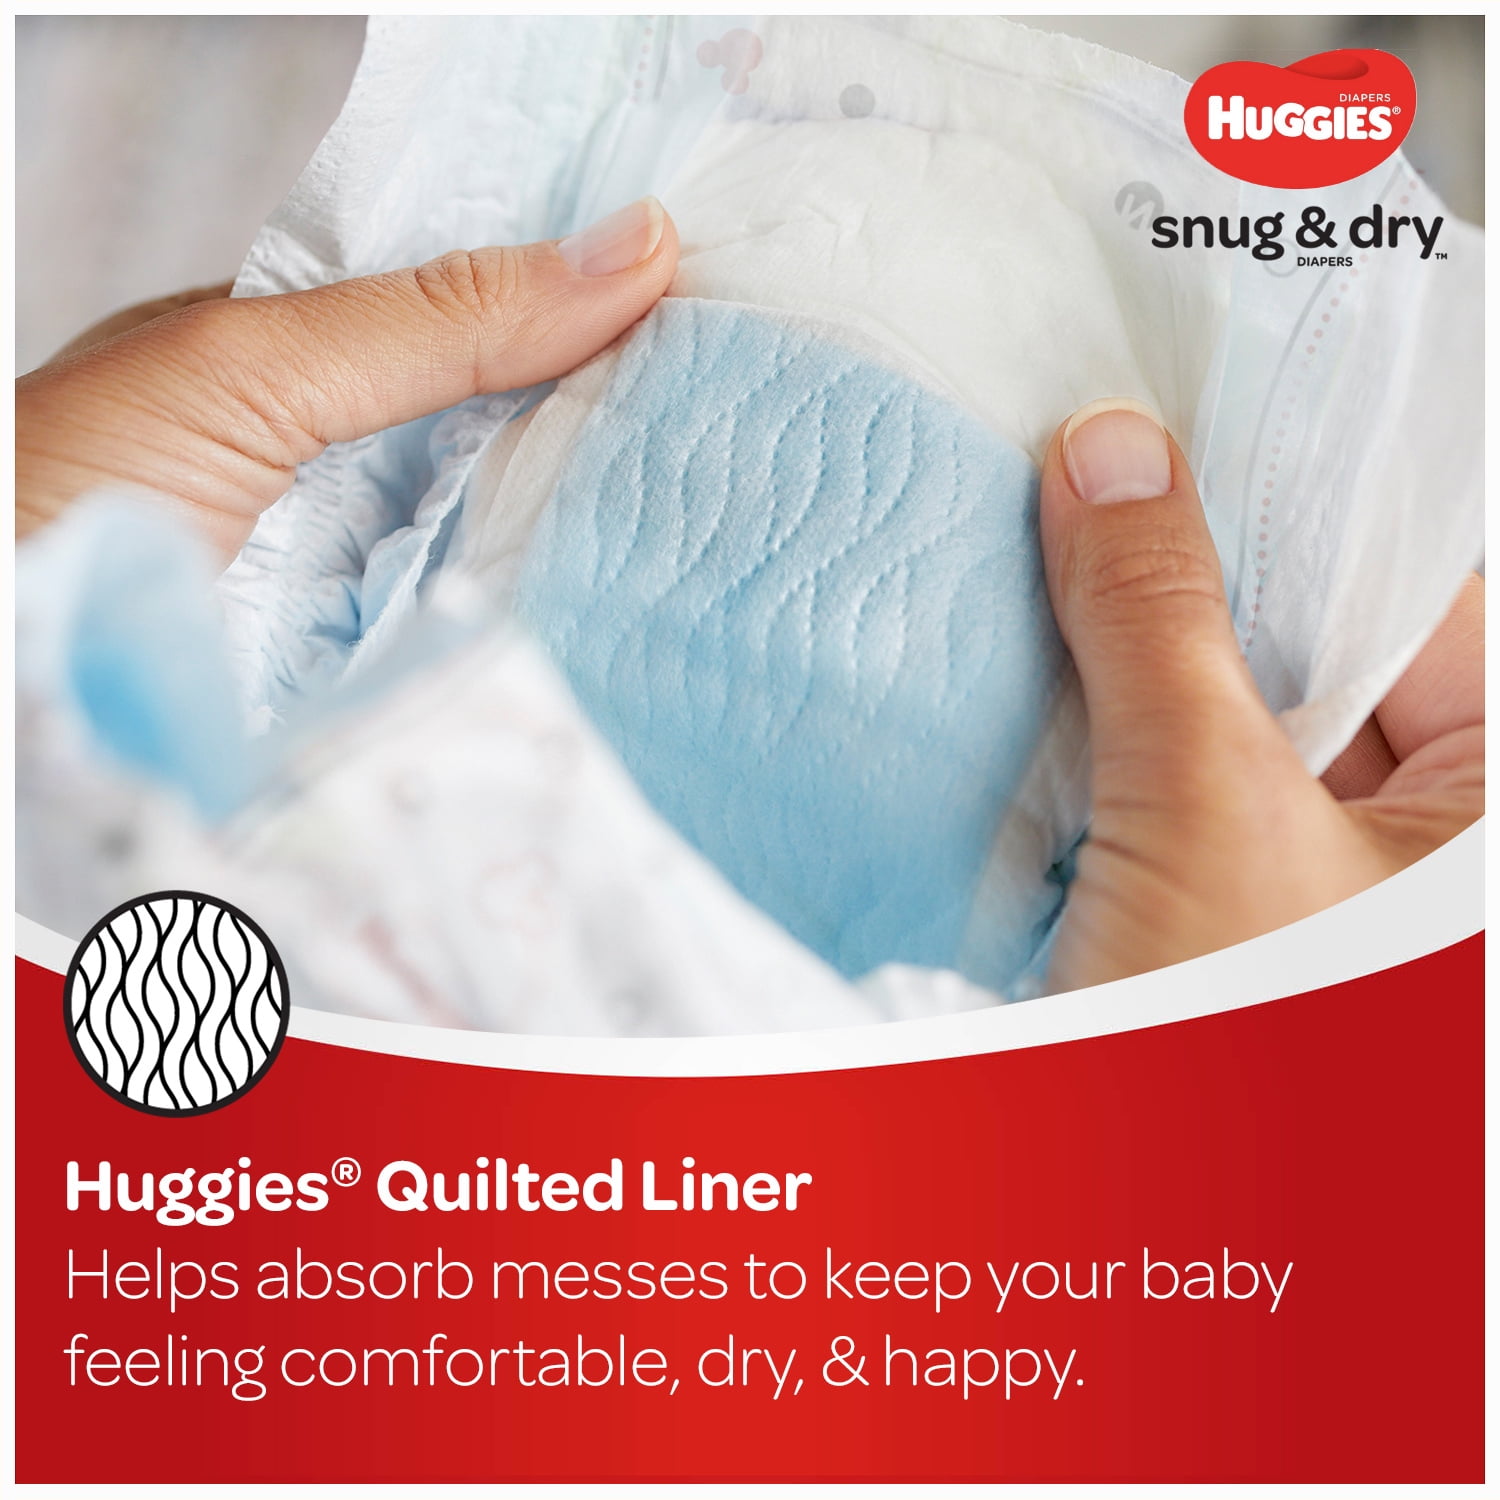 Huggies Snug and Dry Diapers Size 6 Big (60-Count) 43133 - The Home Depot